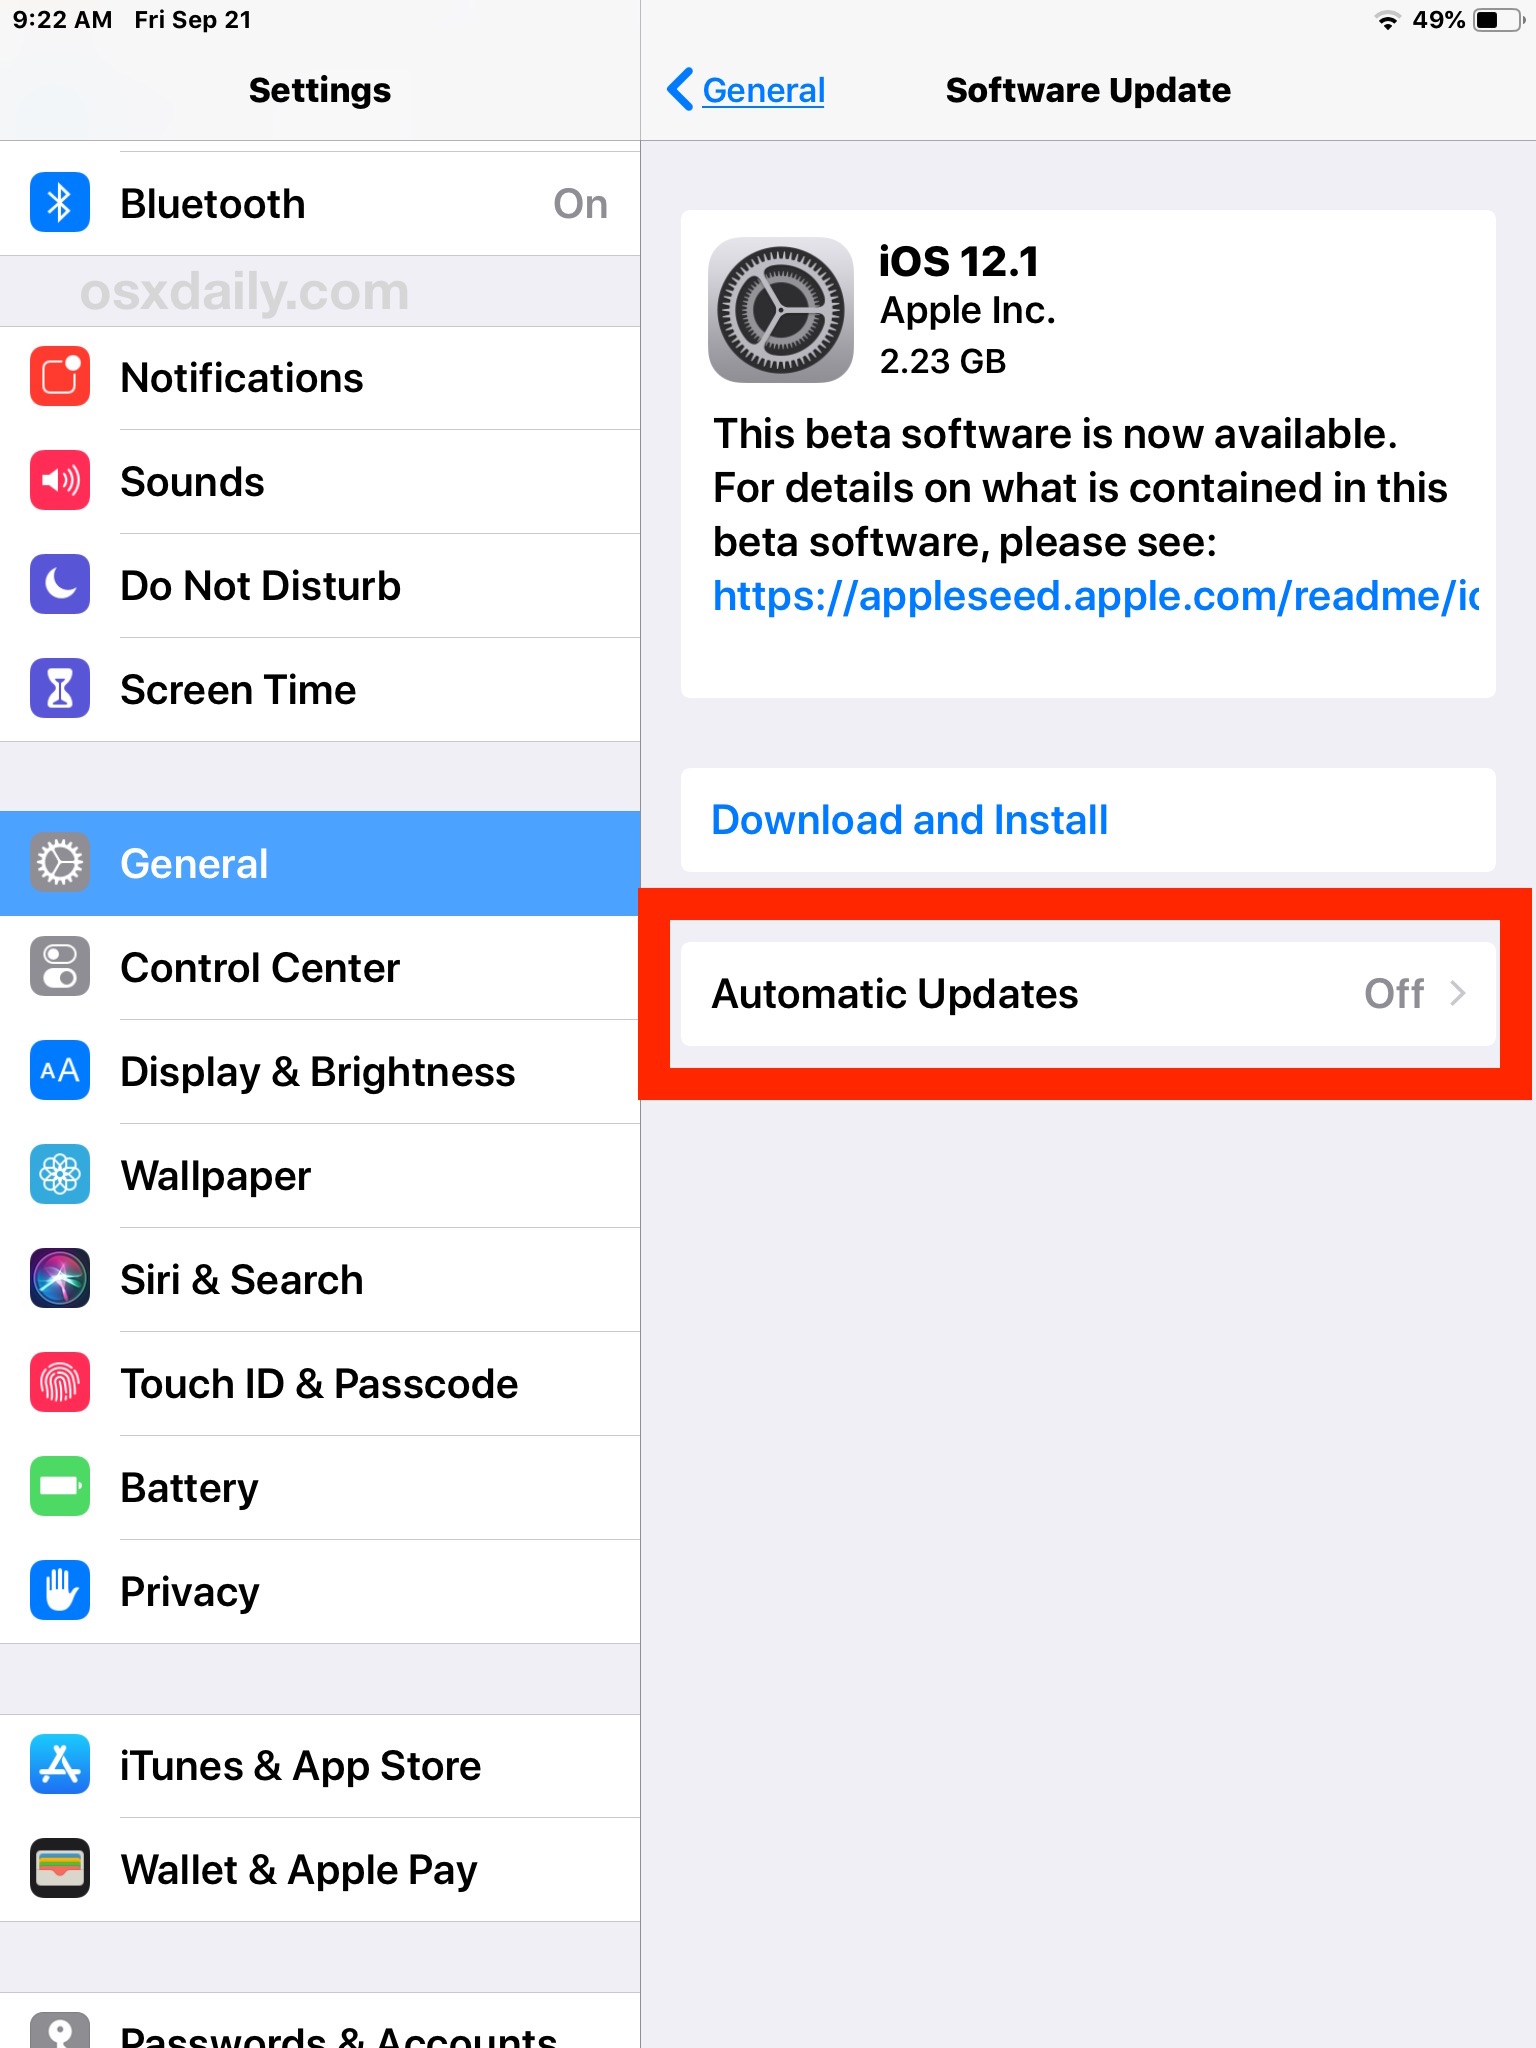 How to Update iOS Automatically on iPhone or iPad